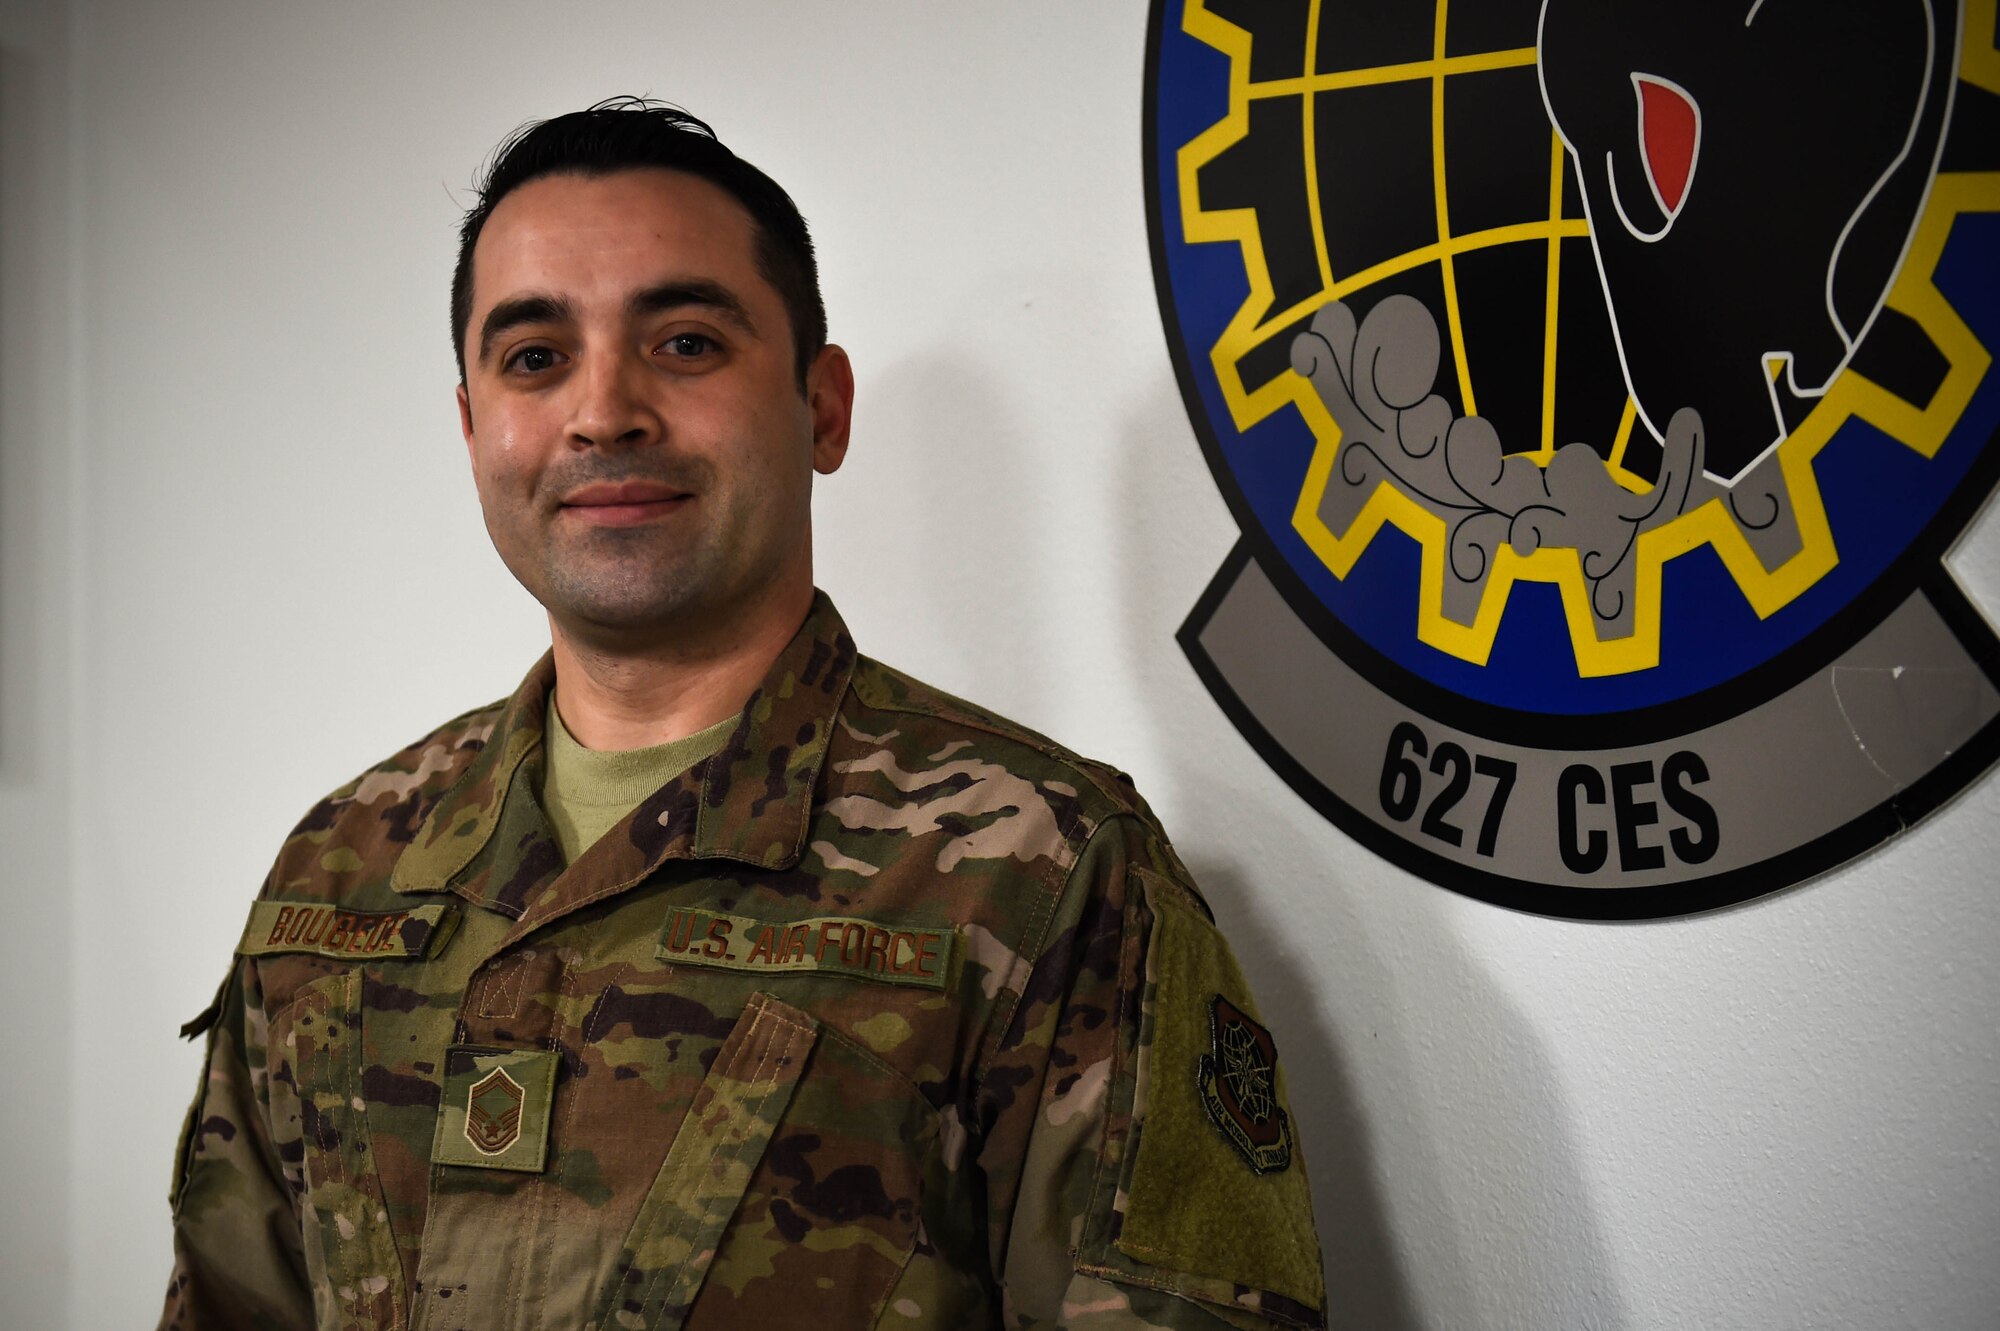 Senior Master Sgt. Adam Boubede, 627th Civil Engineering Squadron superintendent, poses for a photo on Joint Base Lewis-McChord, Wash., Dec. 3, 2019. He was one of the nine McChord Airmen selected this year for promotion to chief master sergeant, the highest enlisted rank in the Air Force. 

“I feel honored to have achieved such a distinction and humbled by the new challenges that it will bring. Reflecting on this accomplishment has led me to be grateful for all of my experiences that got me here and I’m thankful for having received all of the mentorship along my journey. I am excited to have an even greater opportunity to develop the next generation of leaders.   
‘Iron Sharpens Iron’ is a simple and effective motto that I learned early in my career. Competitiveness can certainly tear down relationships and organizations, but the dynamic changes drastically when we leverage each other’s strengths for mutual benefit and we understand that we grow stronger together rather than apart.  
An important principle that has proved its worth repeatedly is ‘never forget where I came from.’ I use this mantra as a guide to ensure I am mindful of how my actions, decisions, and behaviors affects all Airmen. Becoming a Chief only serves to emphasize the importance of this message and I will continue to practice it.” 

(U.S. Air Force photo by Airman 1st Class Mikayla Heineck)